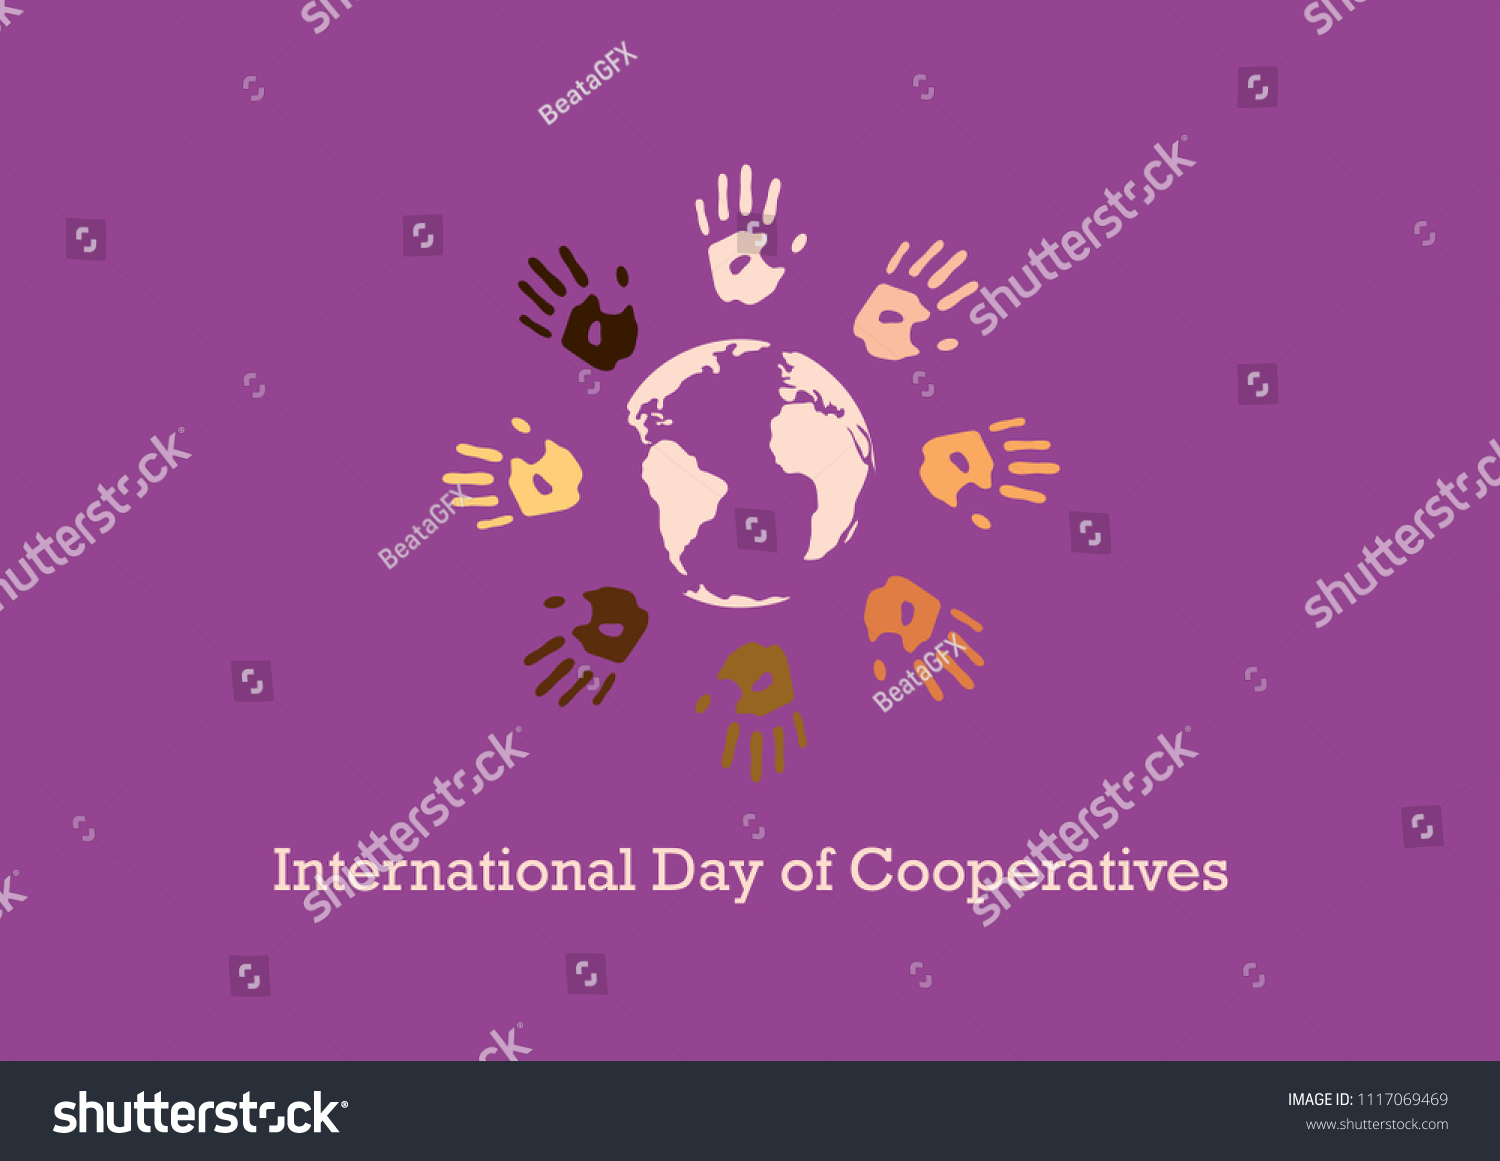 International Day Cooperatives Vector Human Cooperation Stock Vector Royalty Free 1117069469 1813